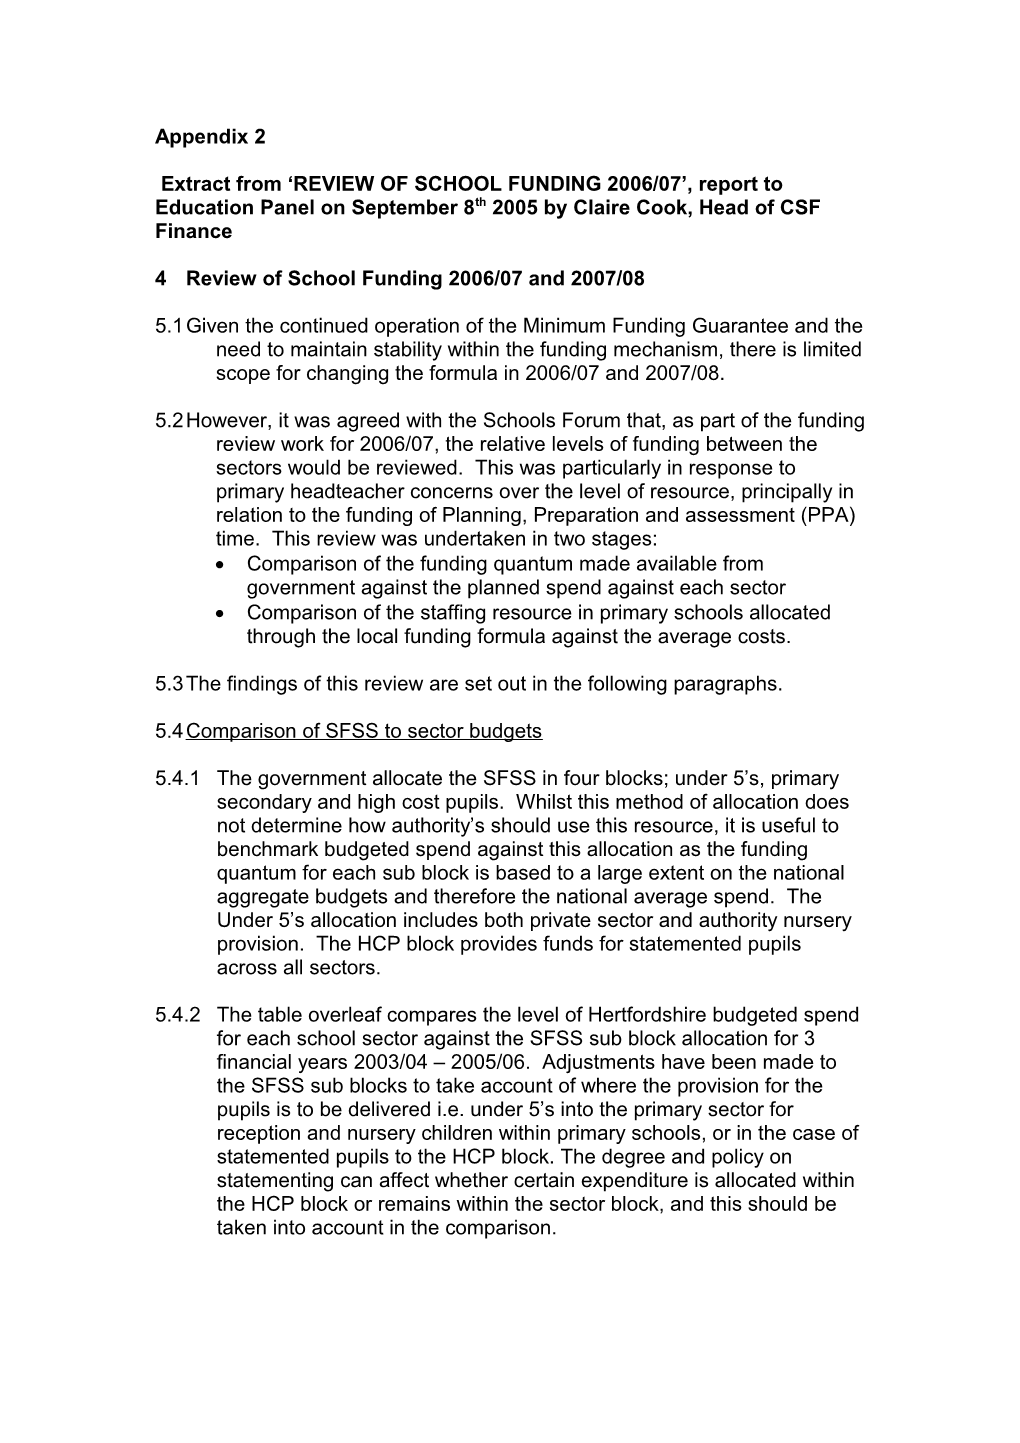 4Review of School Funding 2006/07 and 2007/08